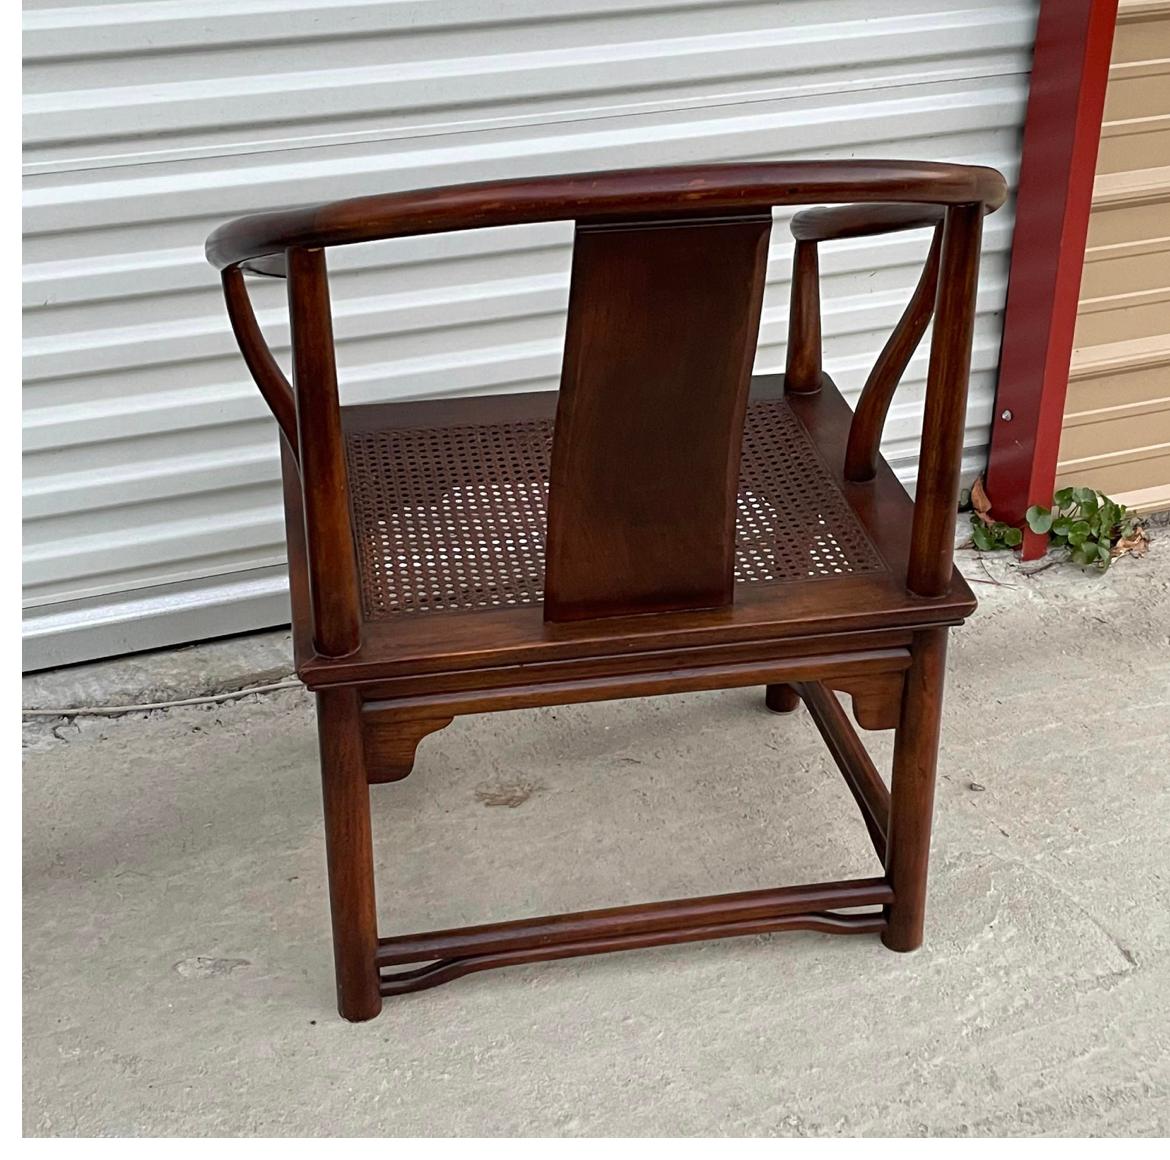 Vintage Henredon Heritage horseshoe back chair. It’s in great condition. Sturdy. The caning is in good condition with no noticeable breaks. Not sure of the type of wood, possibly rosewood, but I am not certain. The color is fantastic, recently